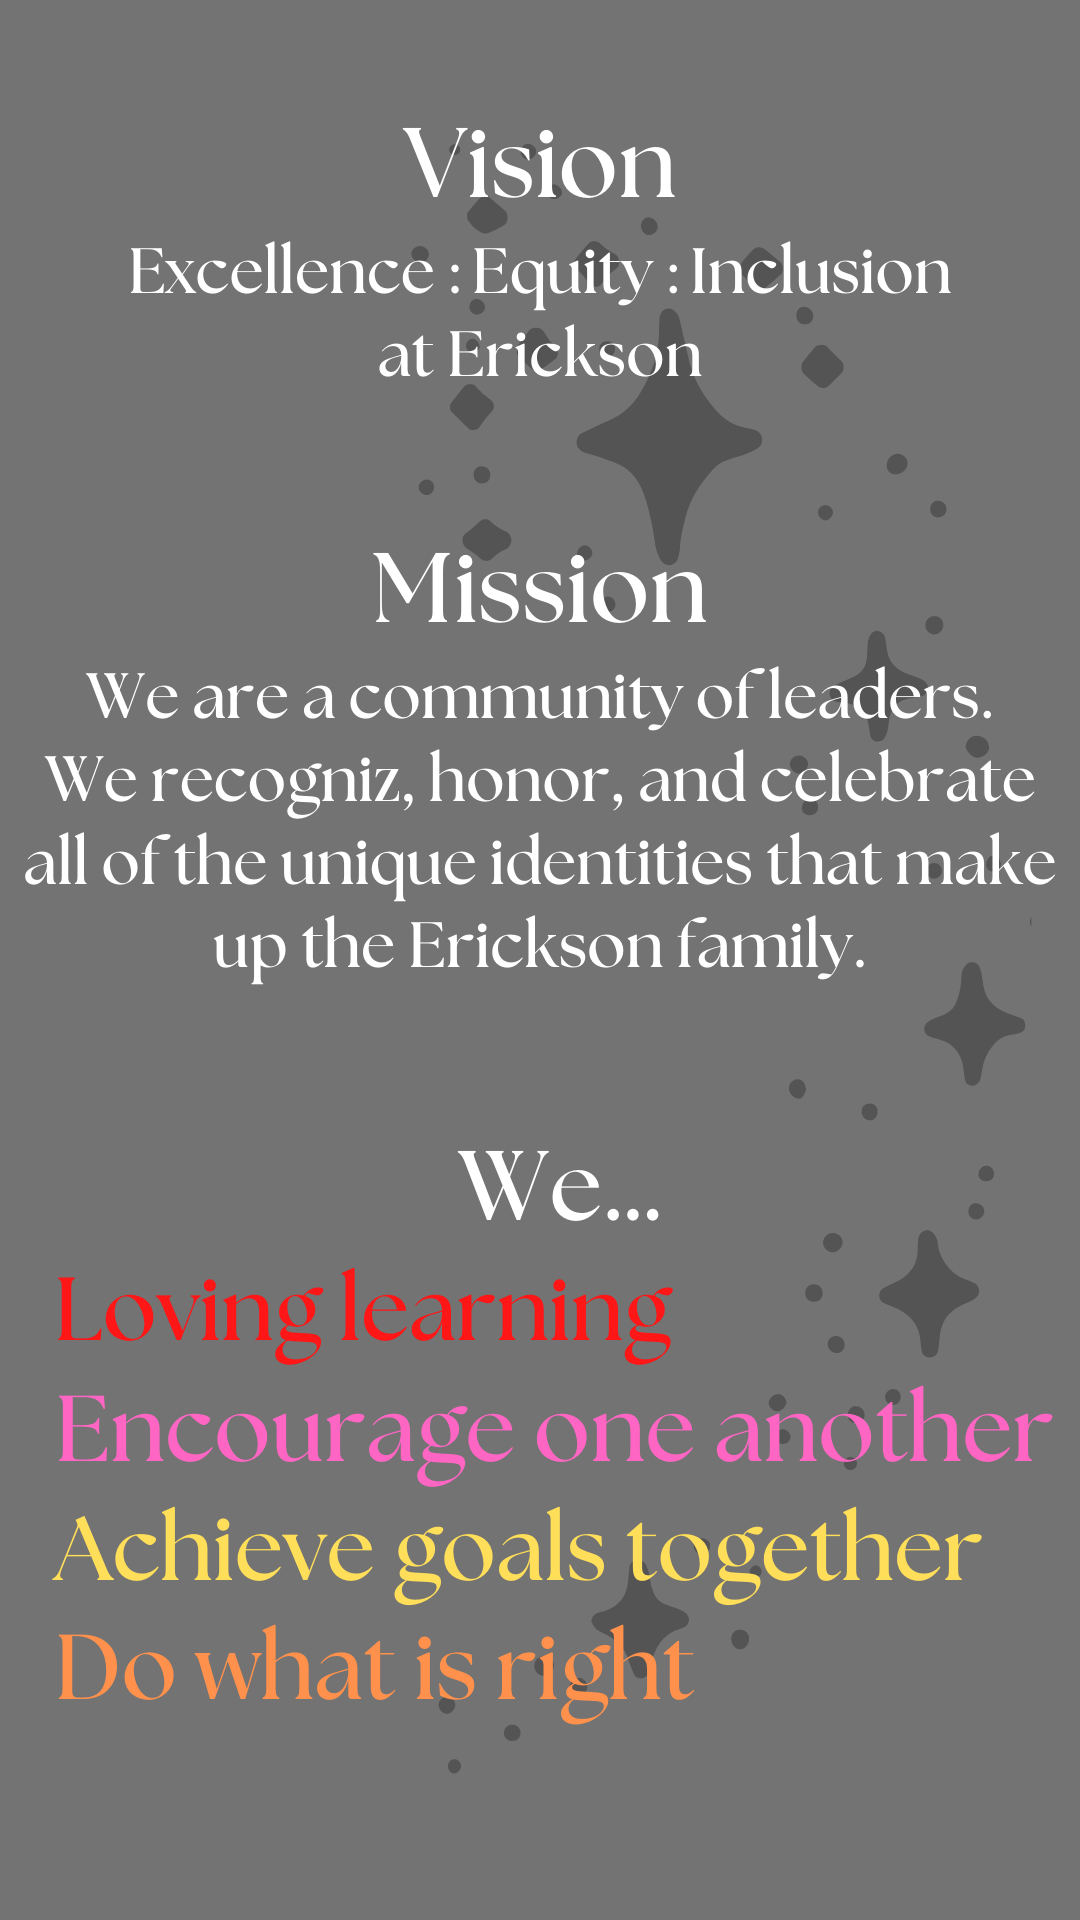 Vision - Excellence, Equity, Inclusion at Erickson. Mission - We are a community of leaders. We recognize, honor, and celebrate all of the unique identities that make up the Erickson family. We love learning, encourage one another, achieve goals together, do what is right!